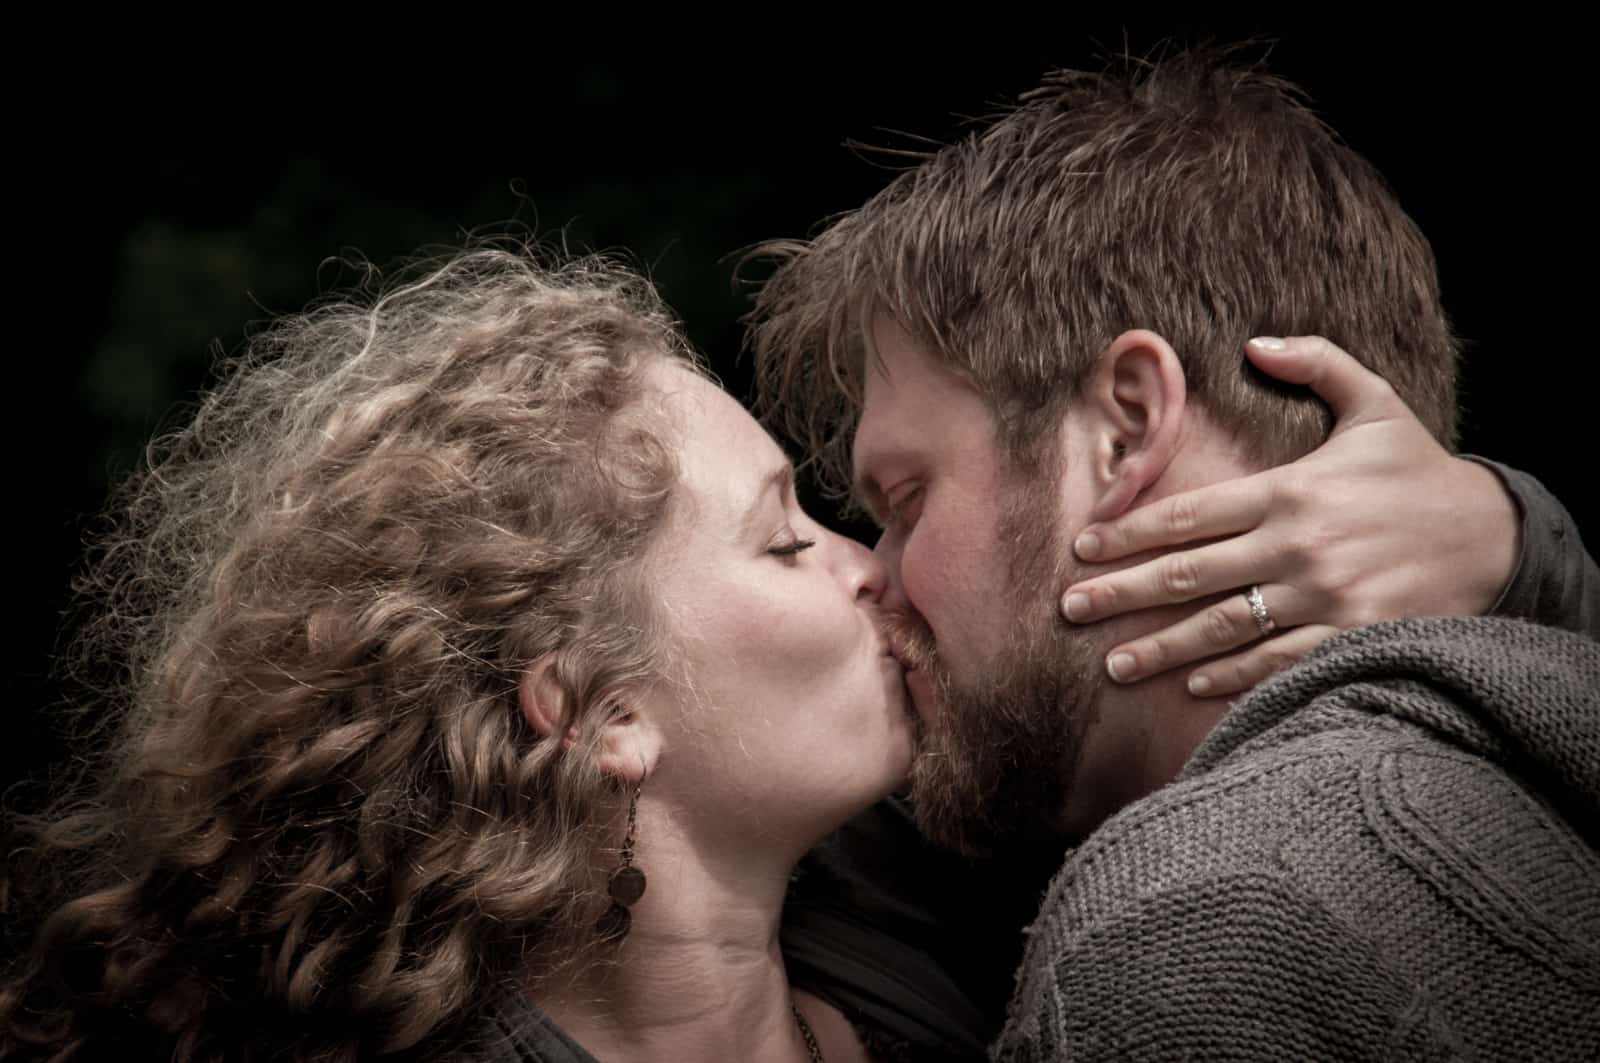 Matt & Rachel sneak a smooch during an "Save the Day" photoshoot in Bruges Belgium. Photo by Photo Tour Brugge.